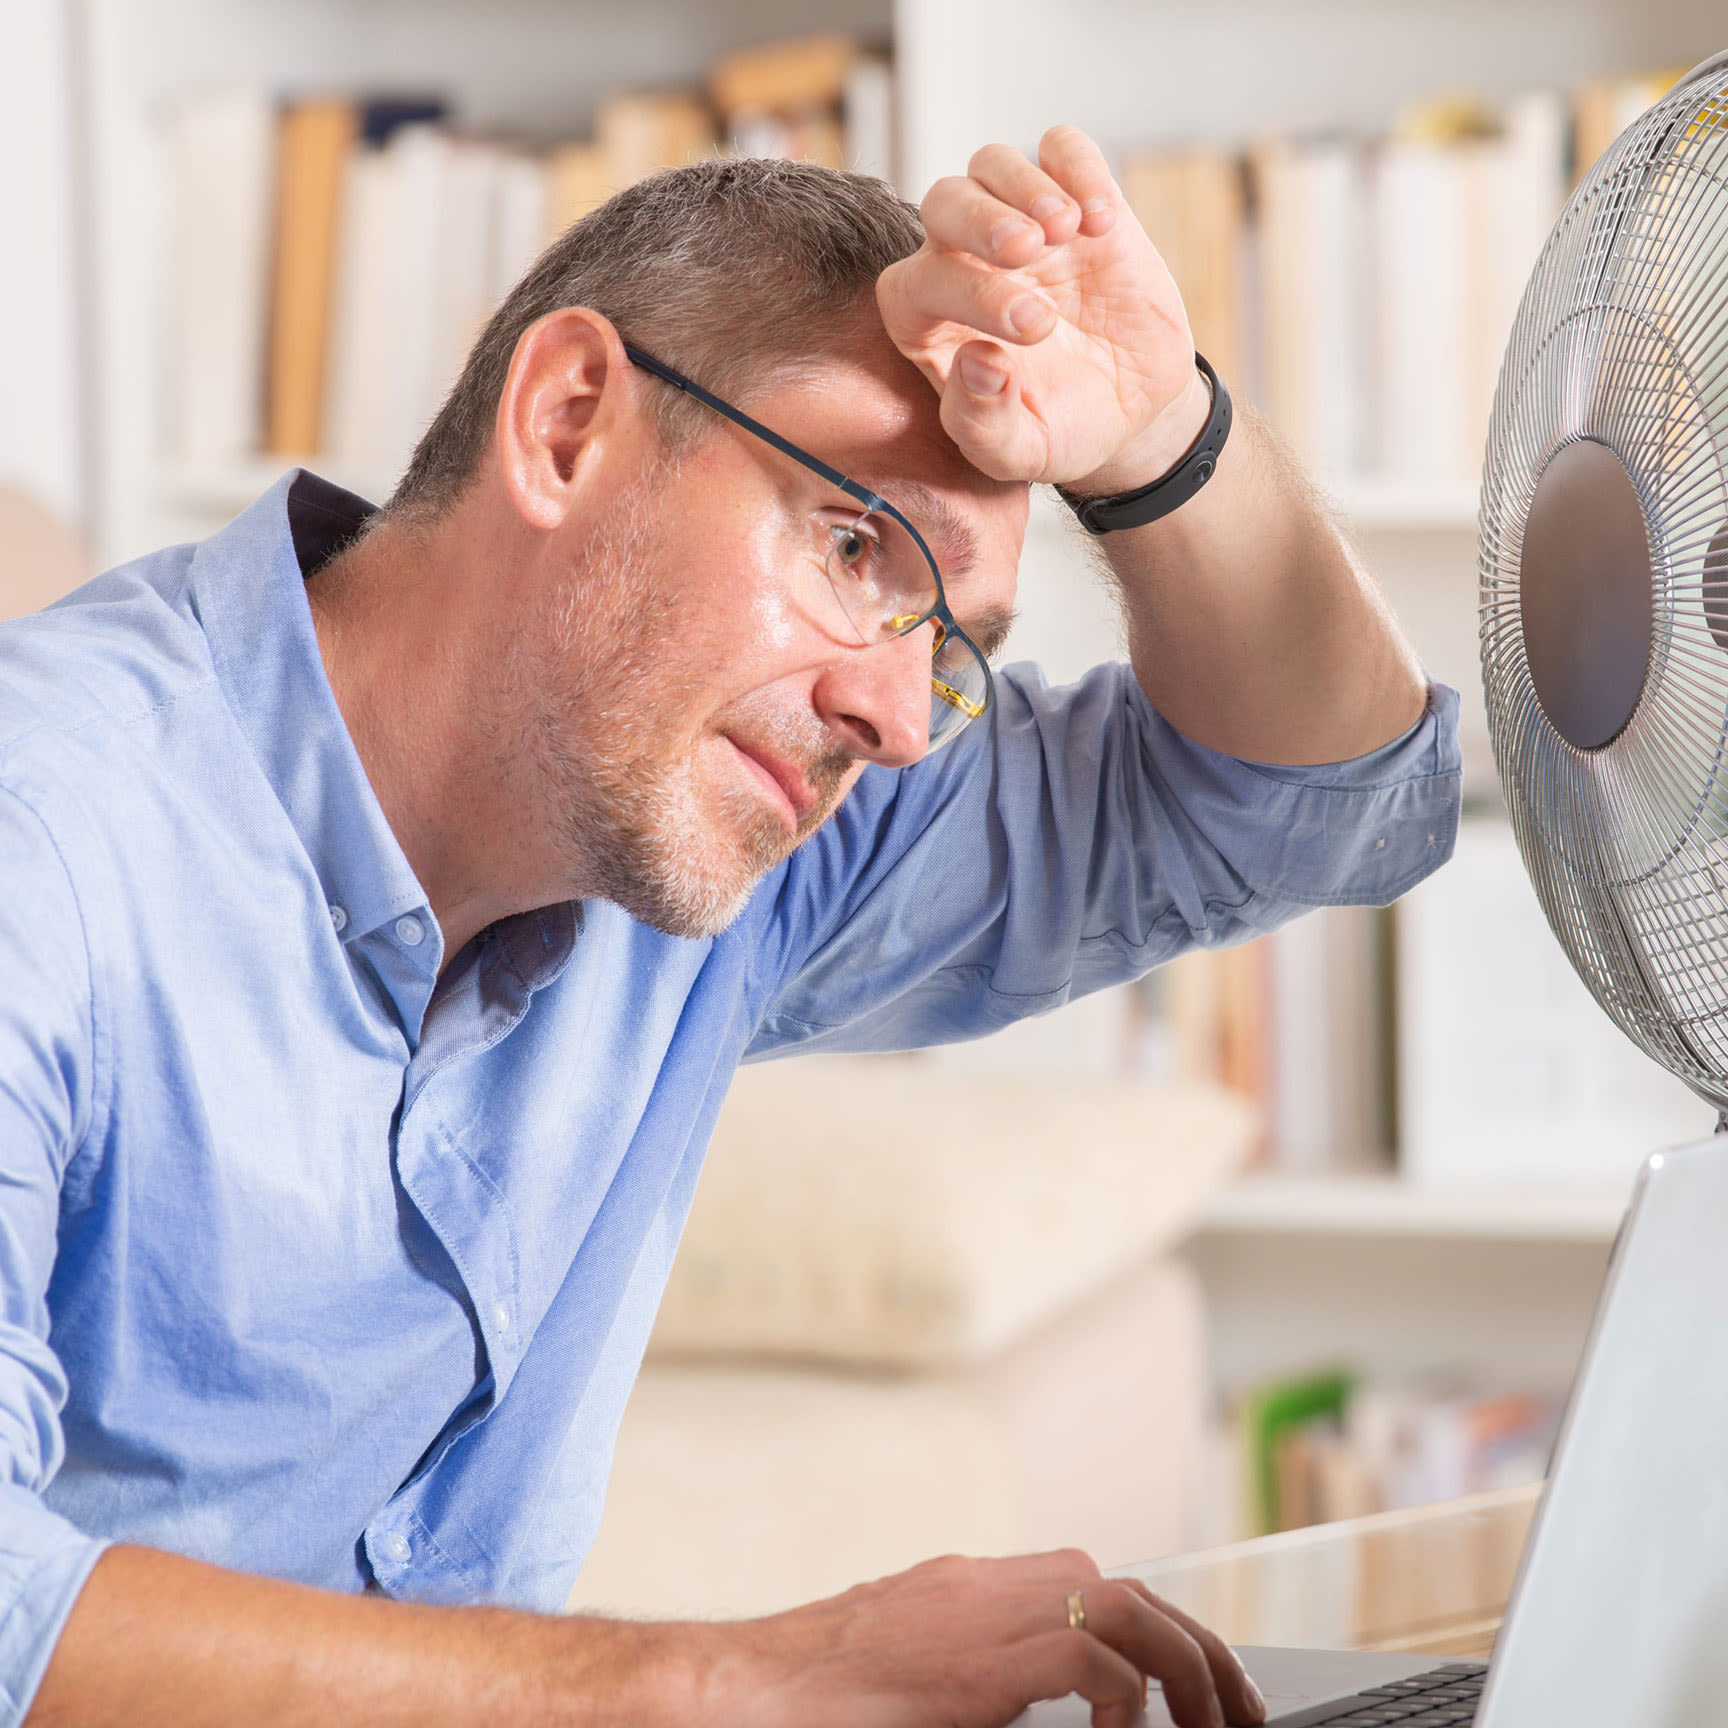 News, 5 Ways to Stay Cool on the Worksite